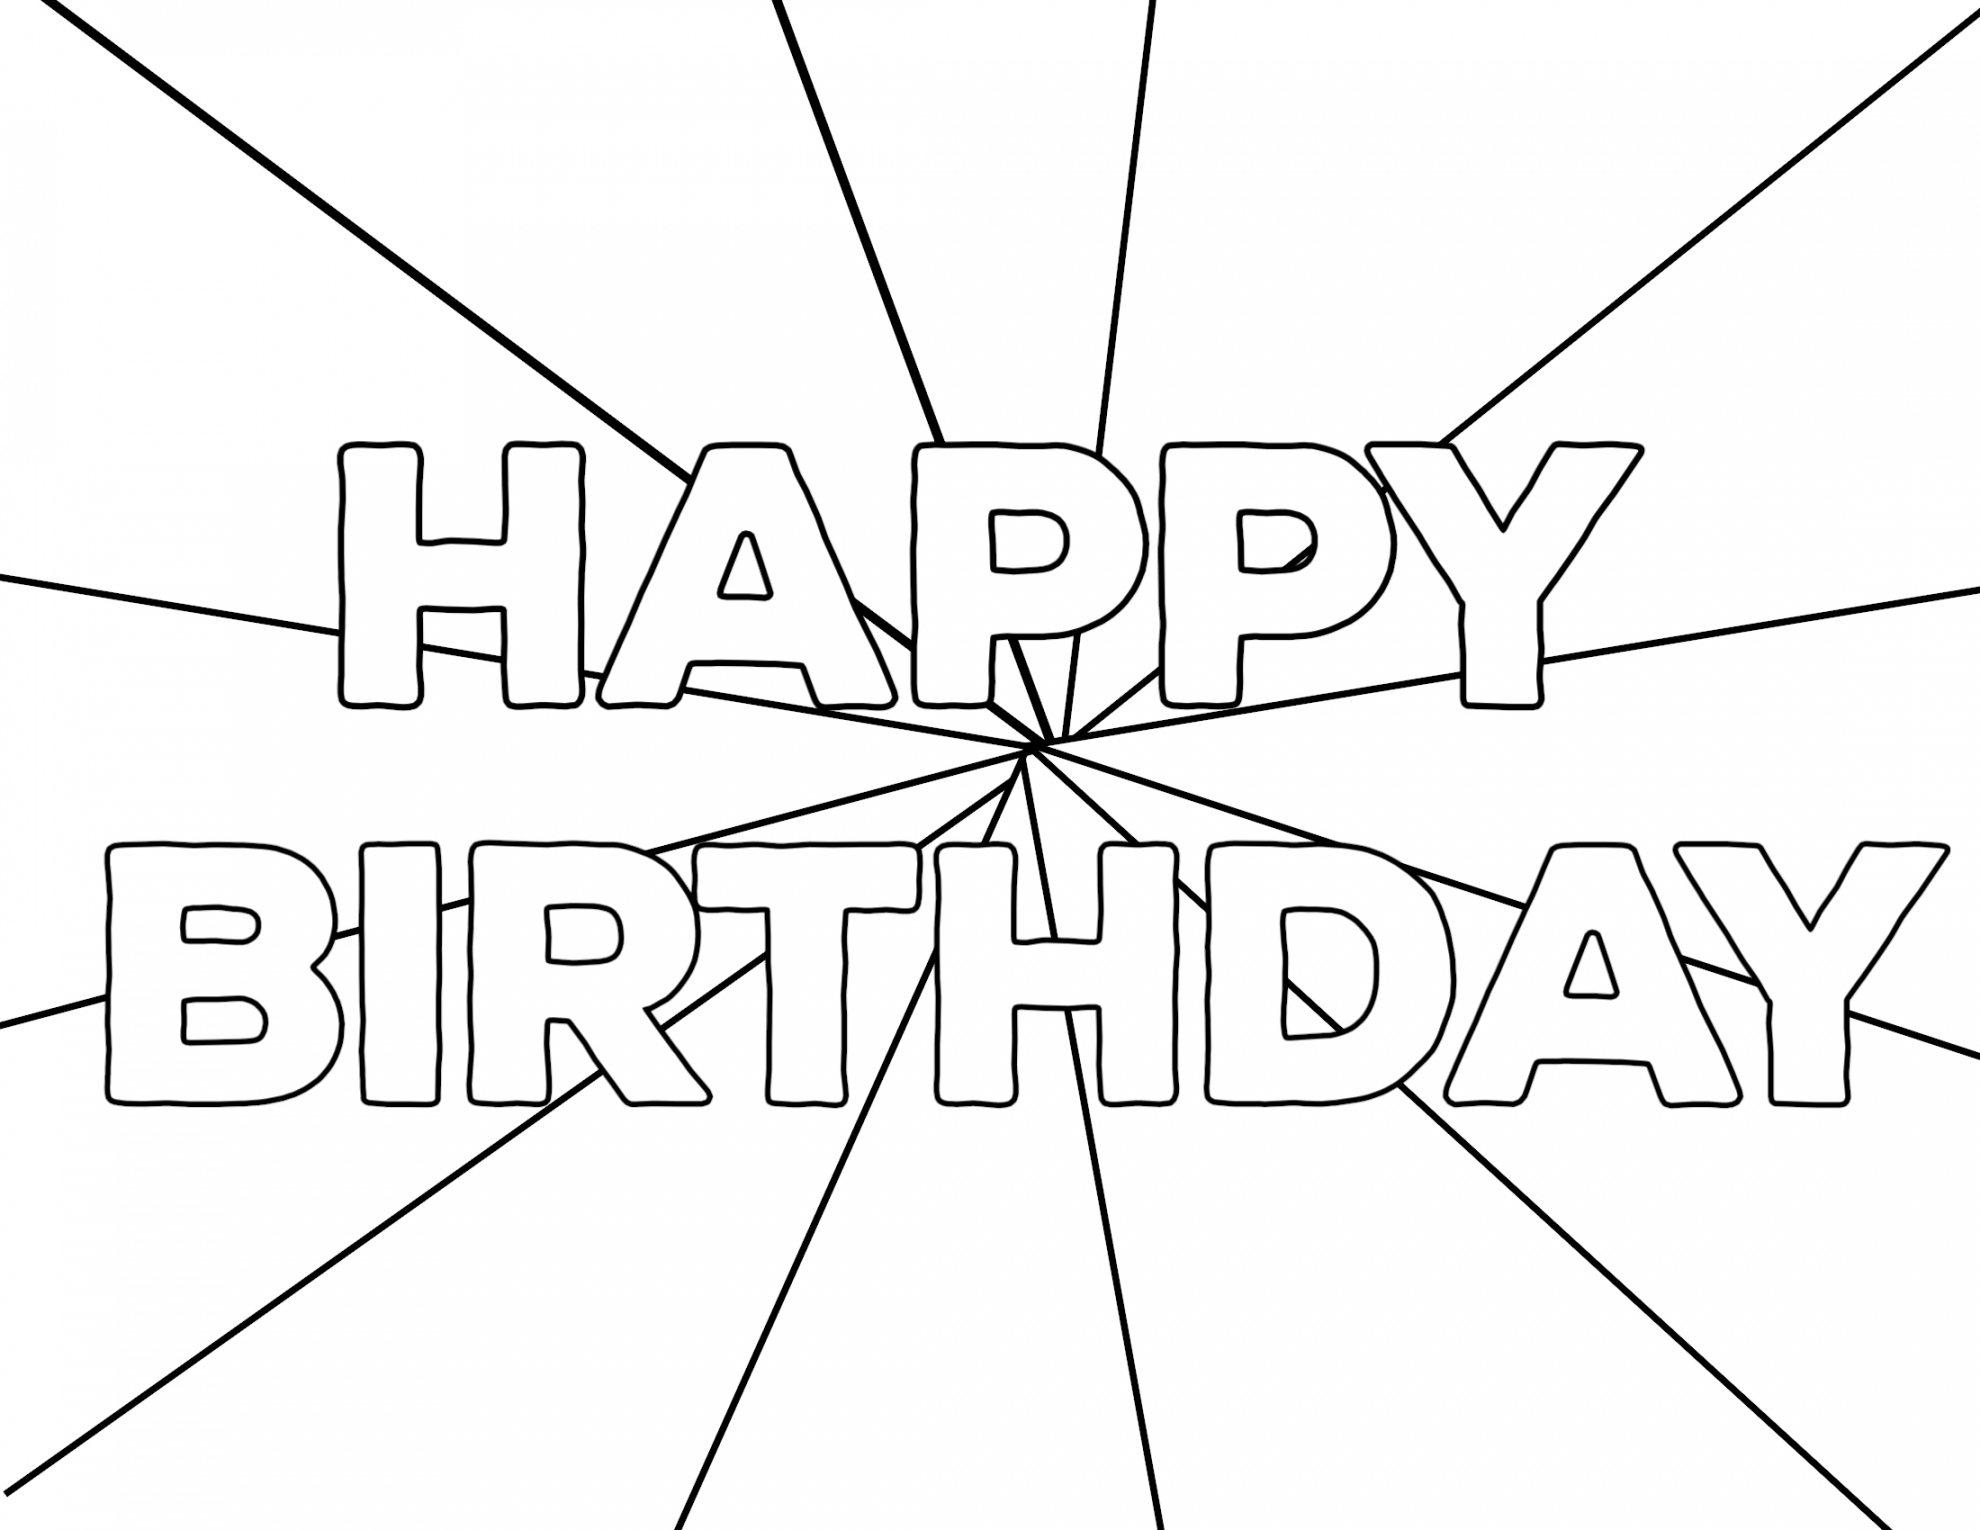 Free Printable Happy Birthday Coloring Pages - Printable - Free Printable Happy Birthday Coloring Pages - Paper Trail Design